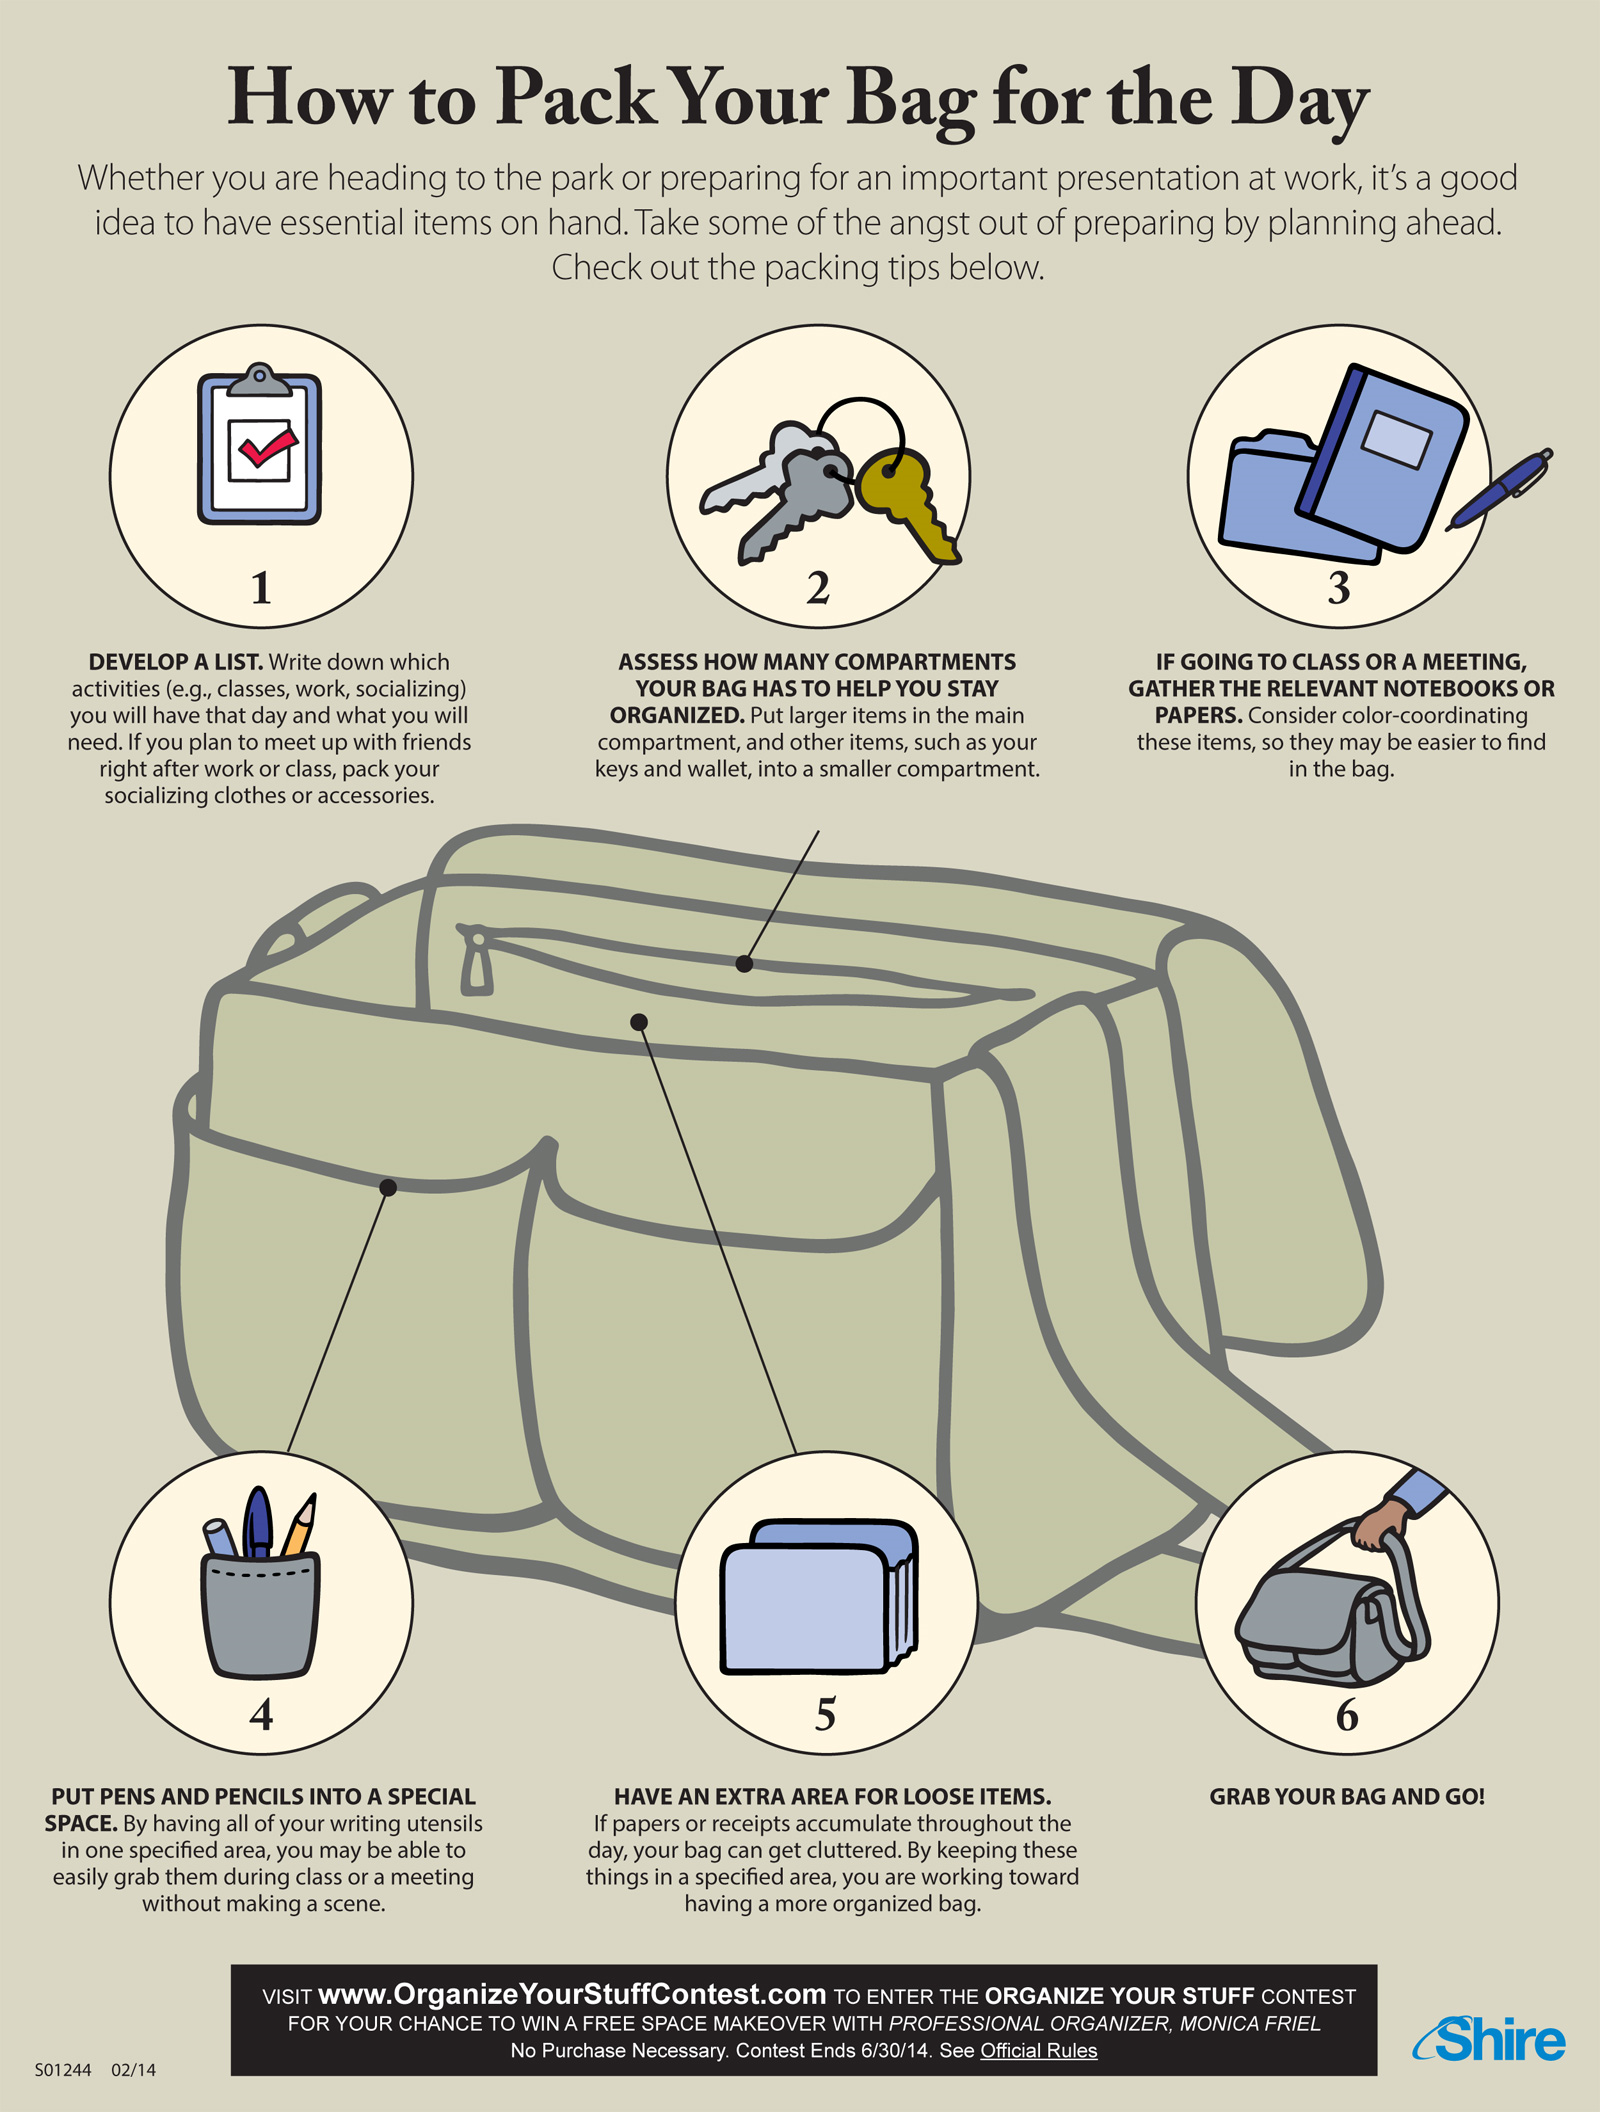 How to pack your bag for the day [Infographic] – The Daily Eastern